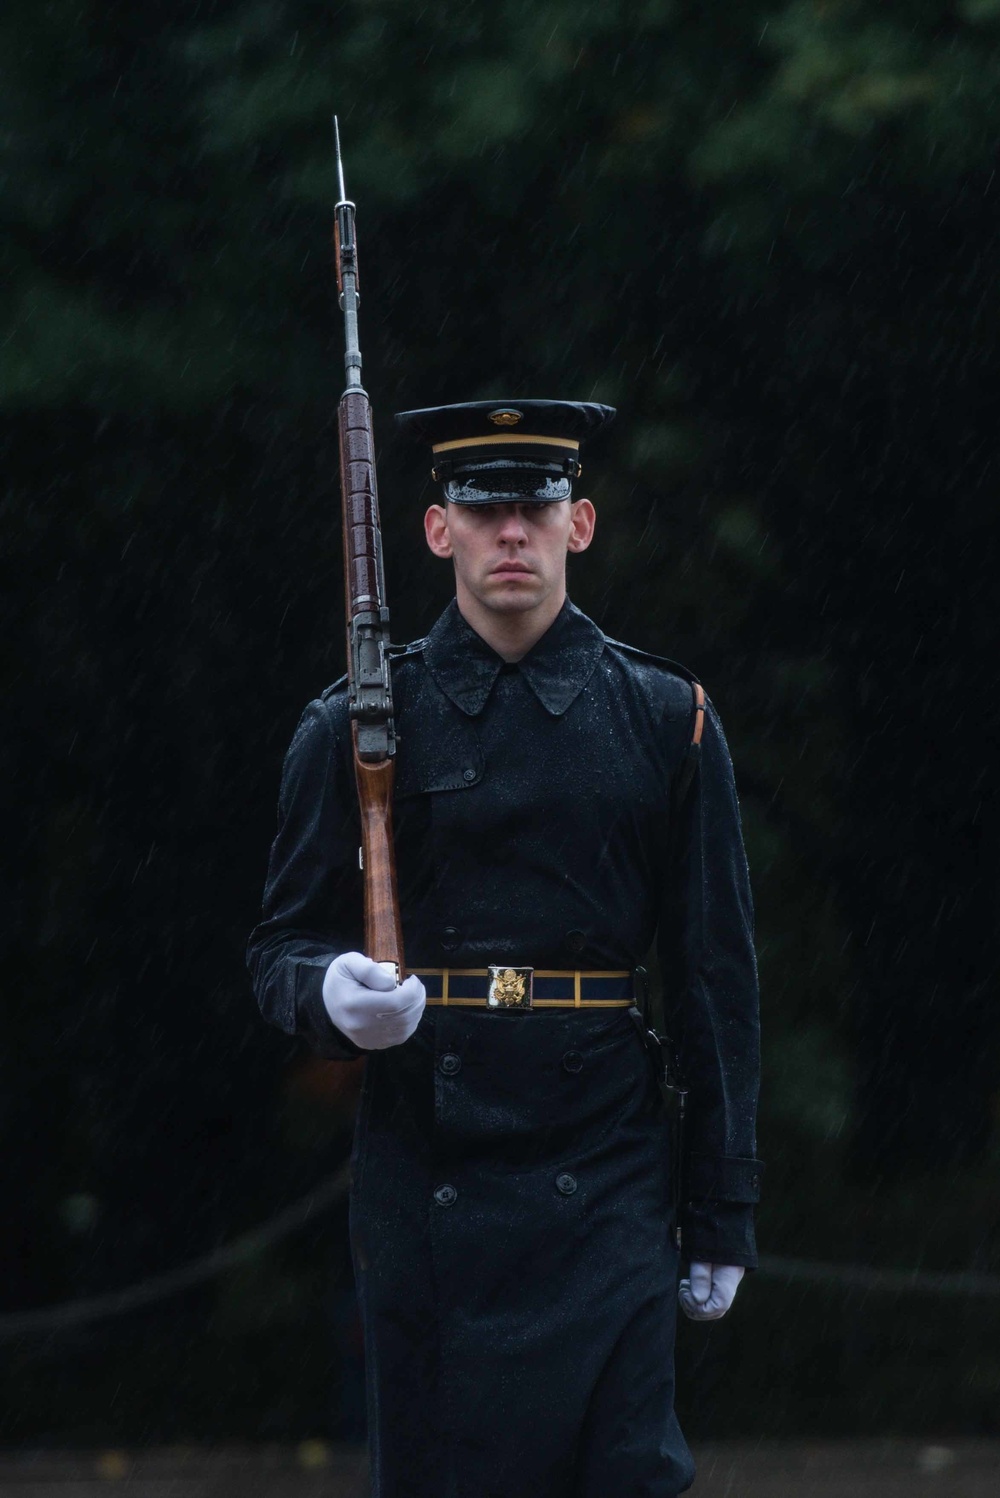 Hurricane Joaquin at the Tomb of the Unknown Soldier